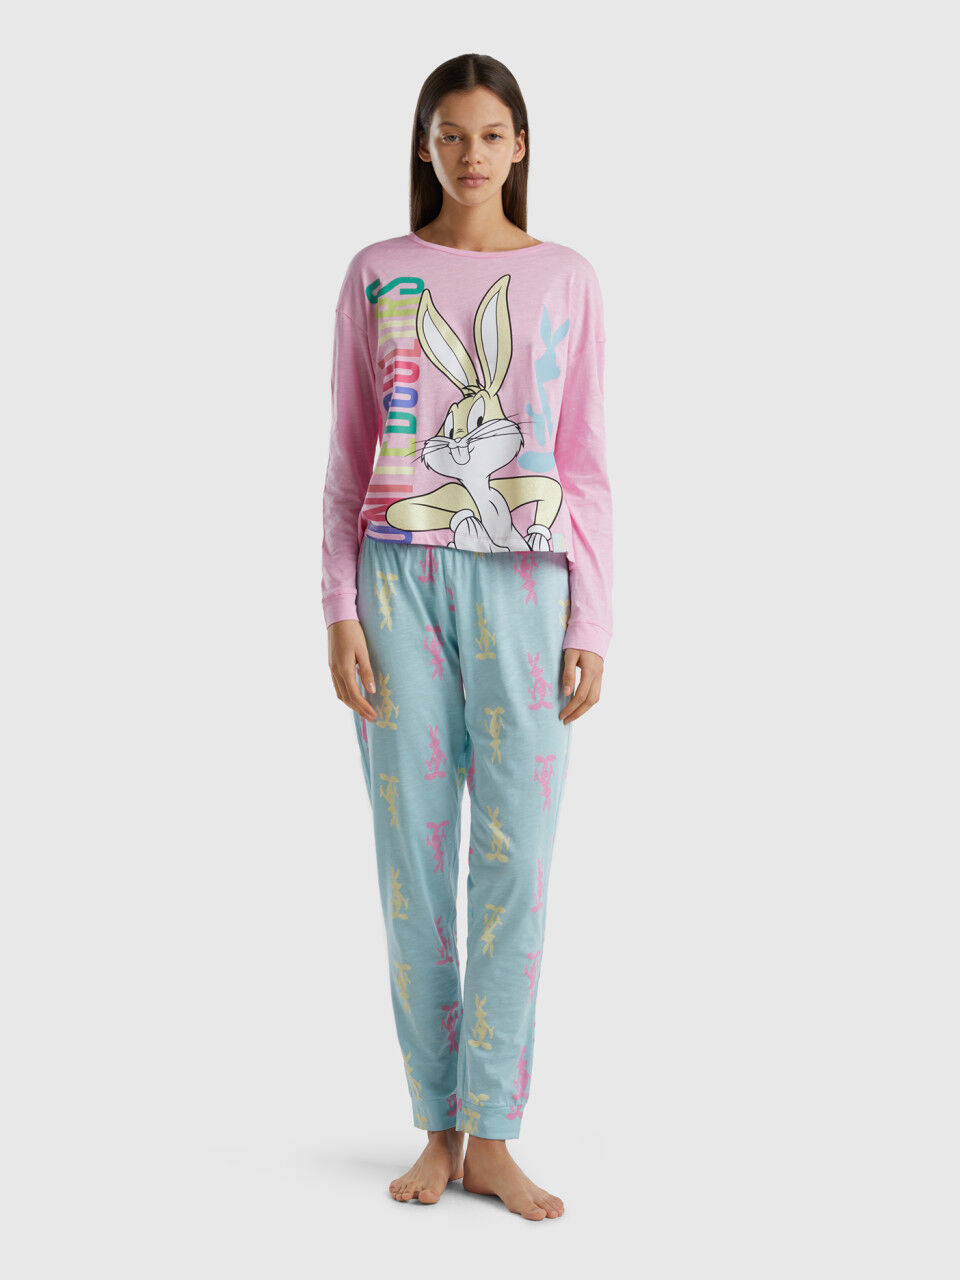 Bugs Bunny trousers